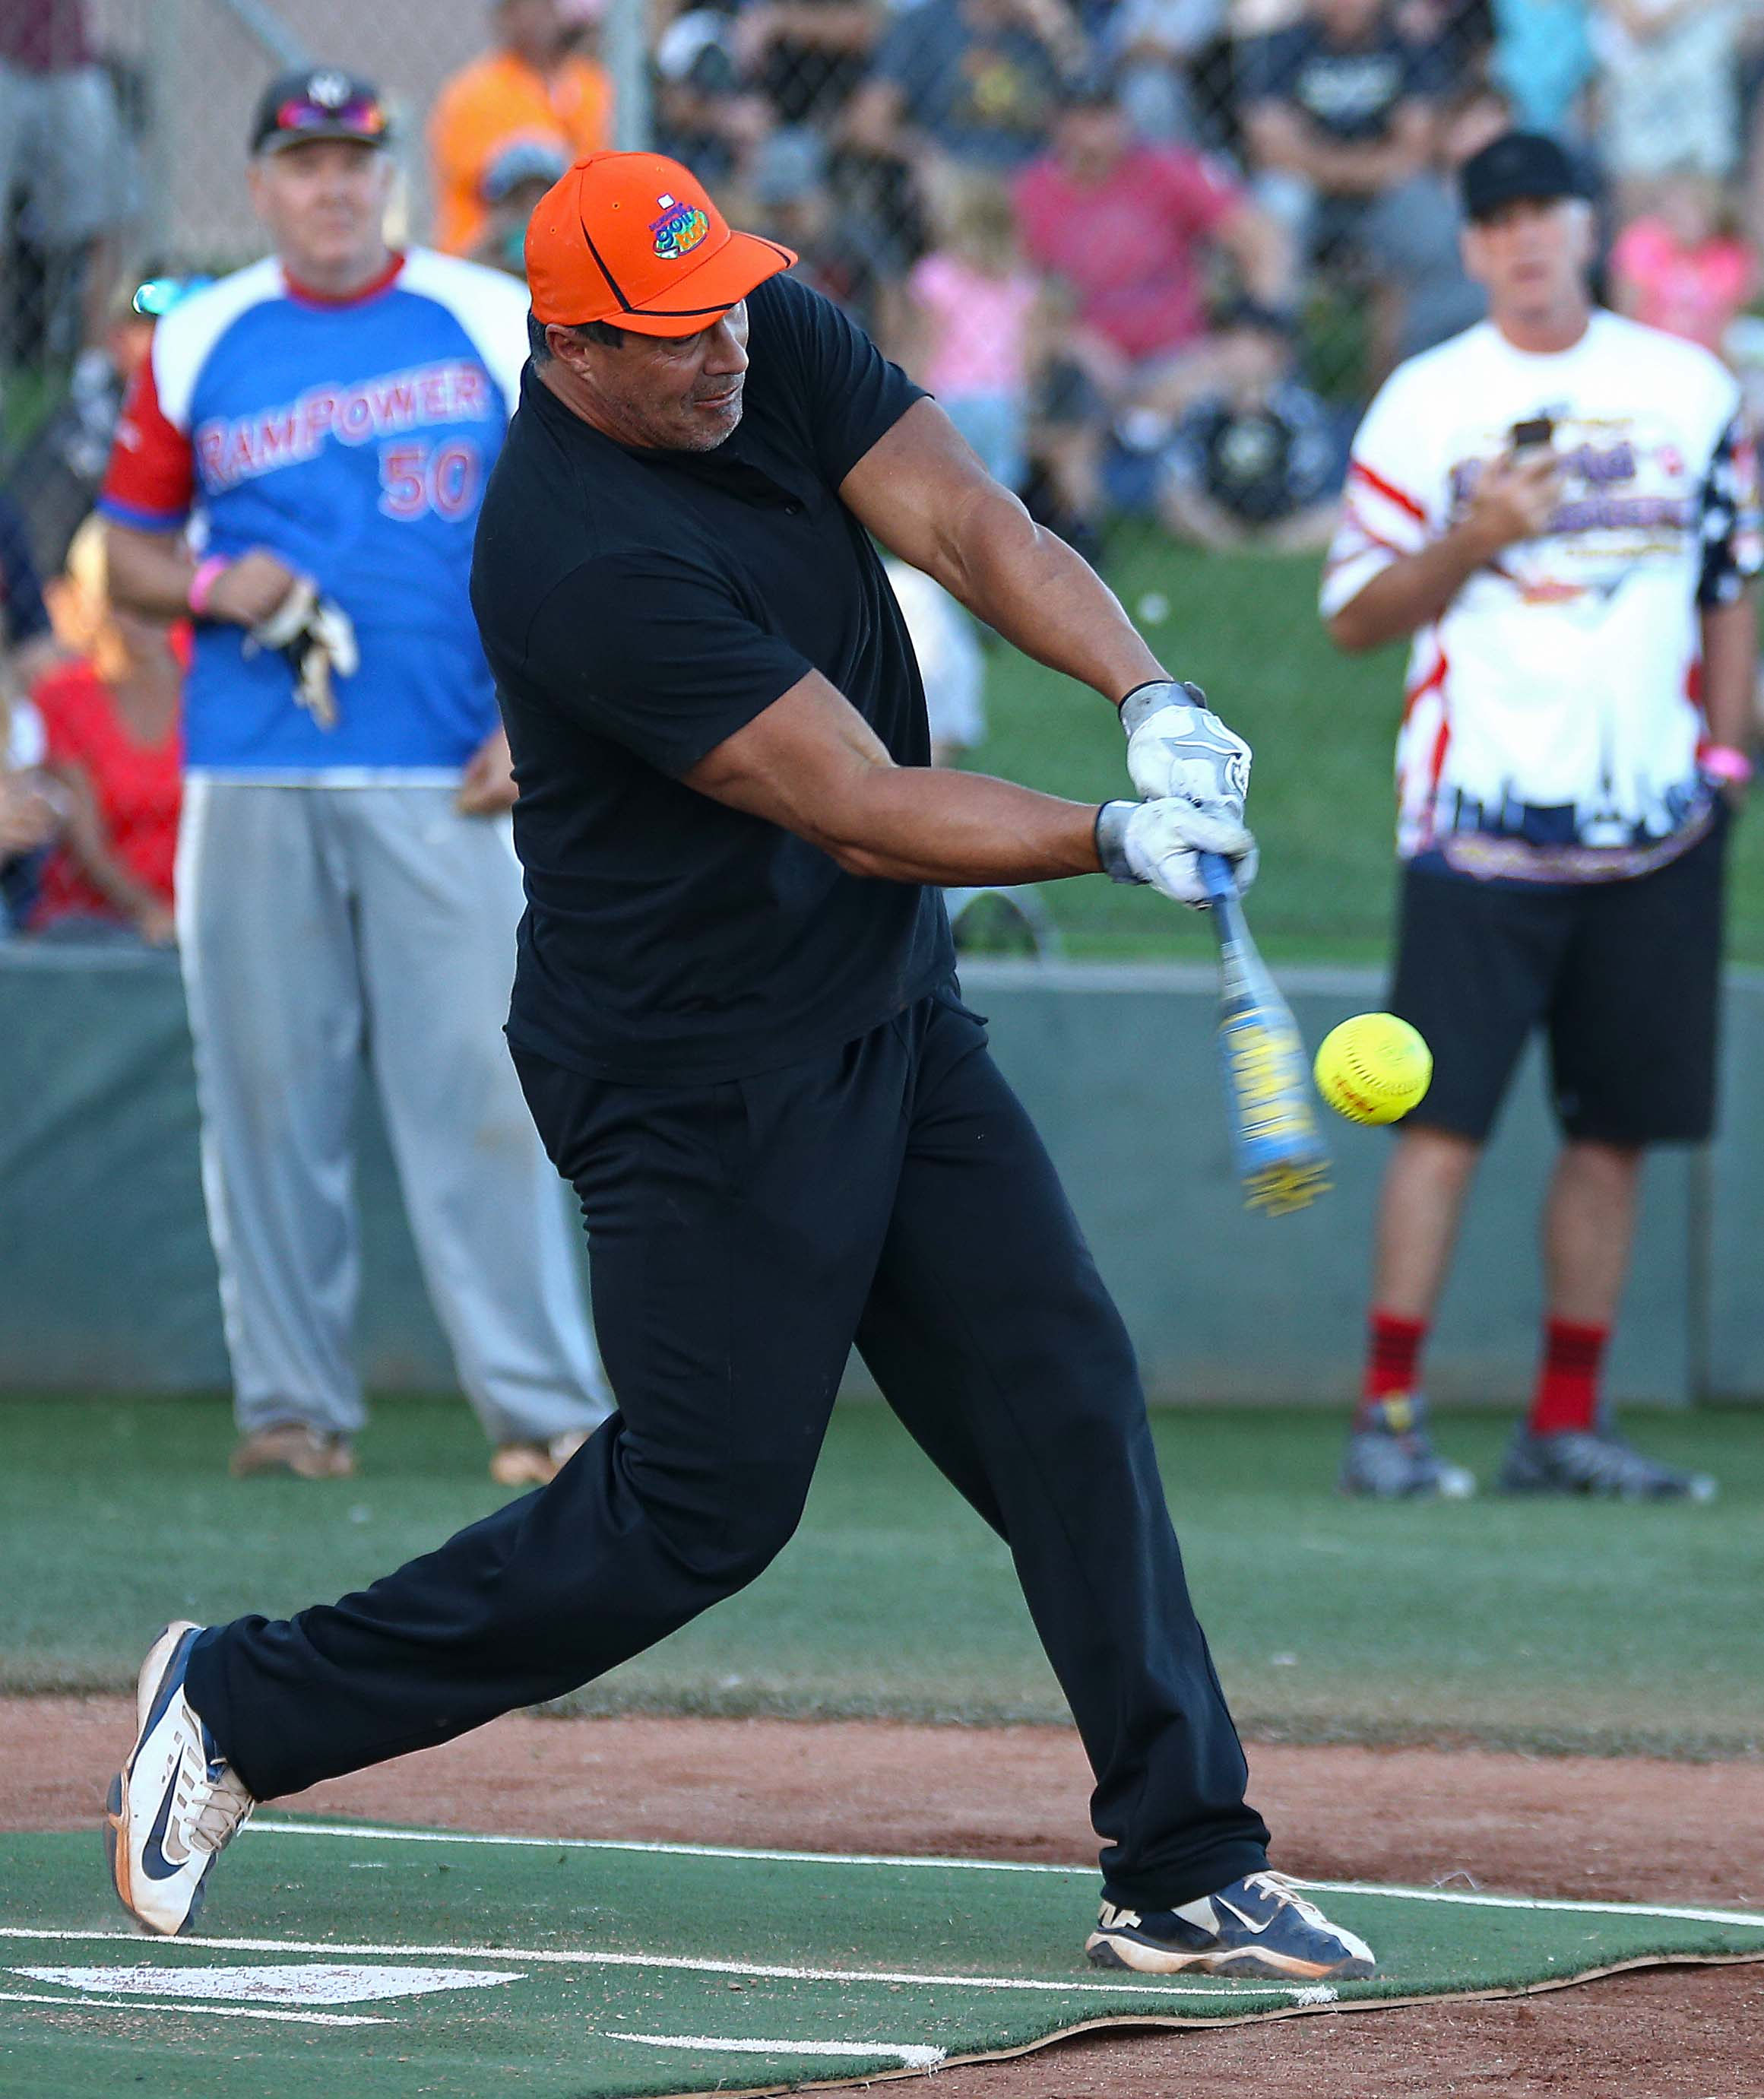 Hit one out': Kids, adults compete in Jose Canseco Home Run Derby